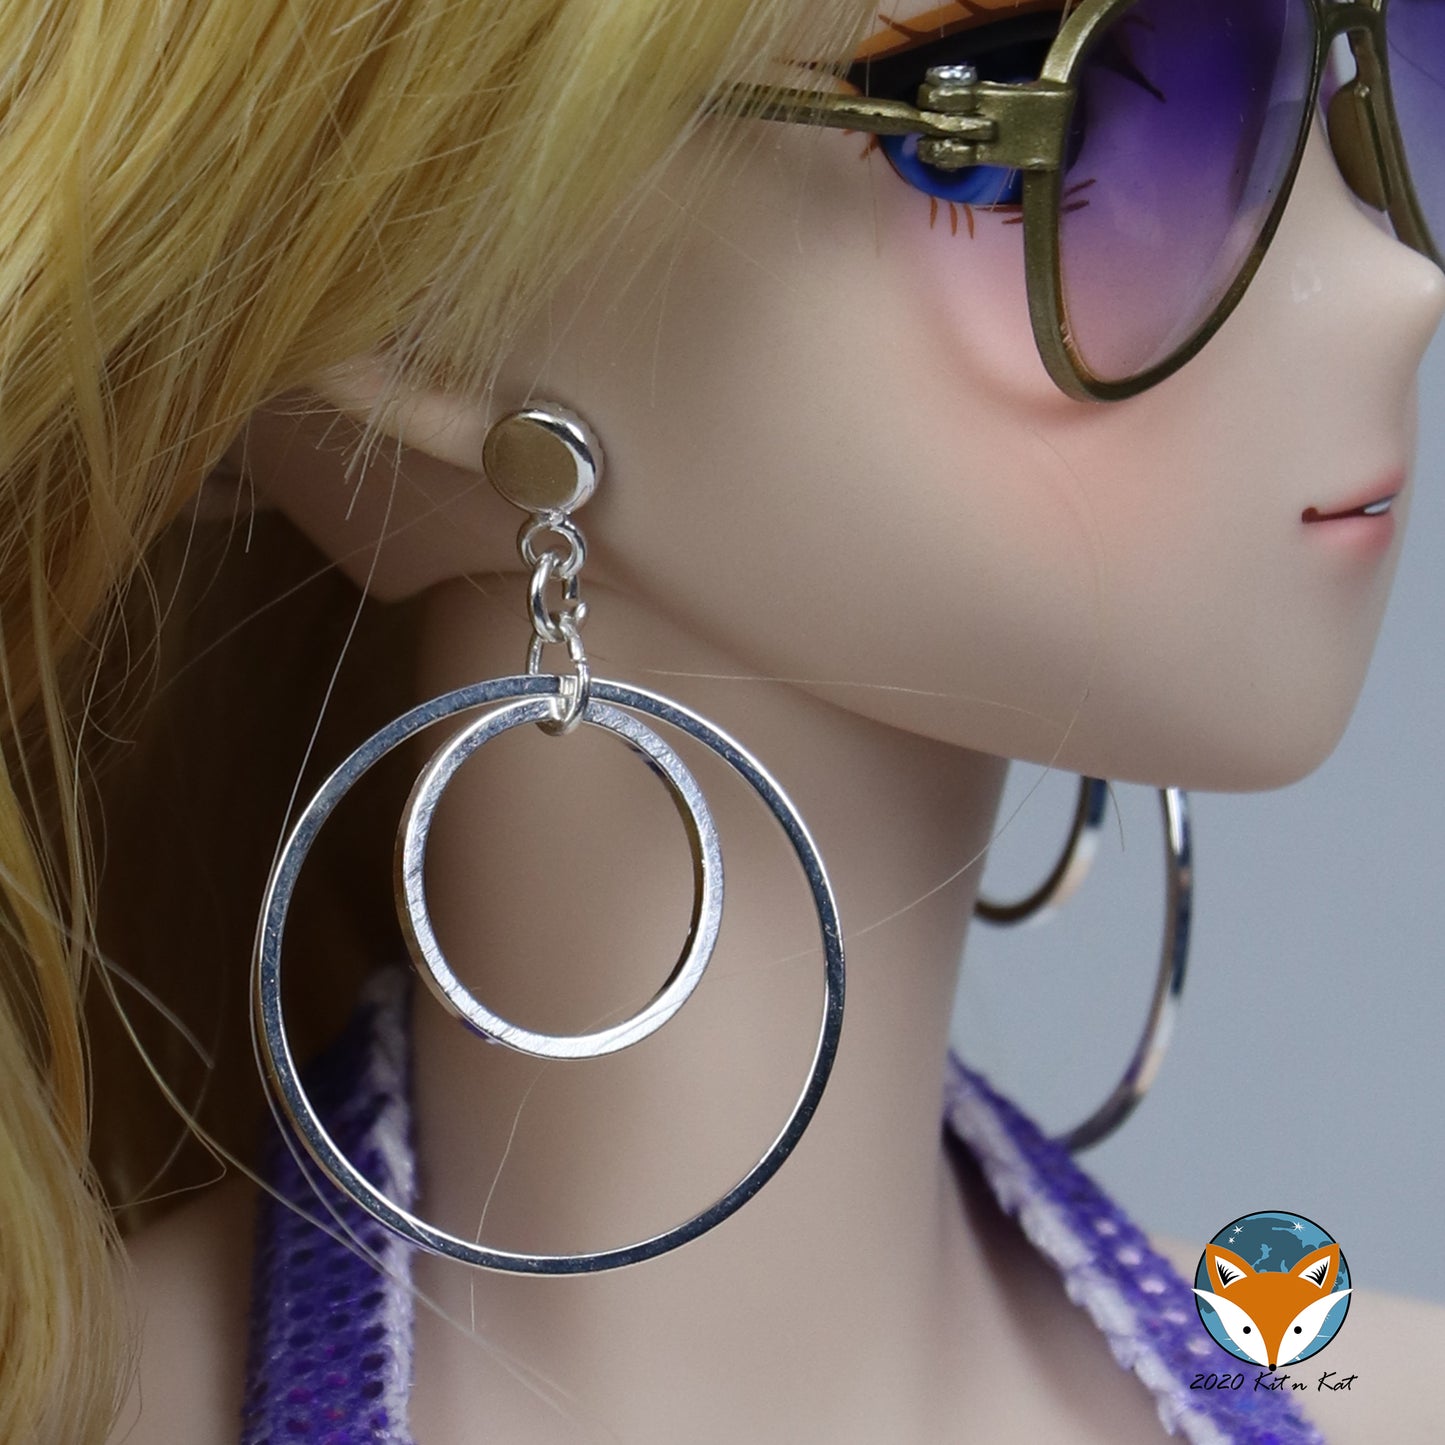 No-Hole Earring for Vinyl Dolls - Round Double Hoop (Silver or Gold)